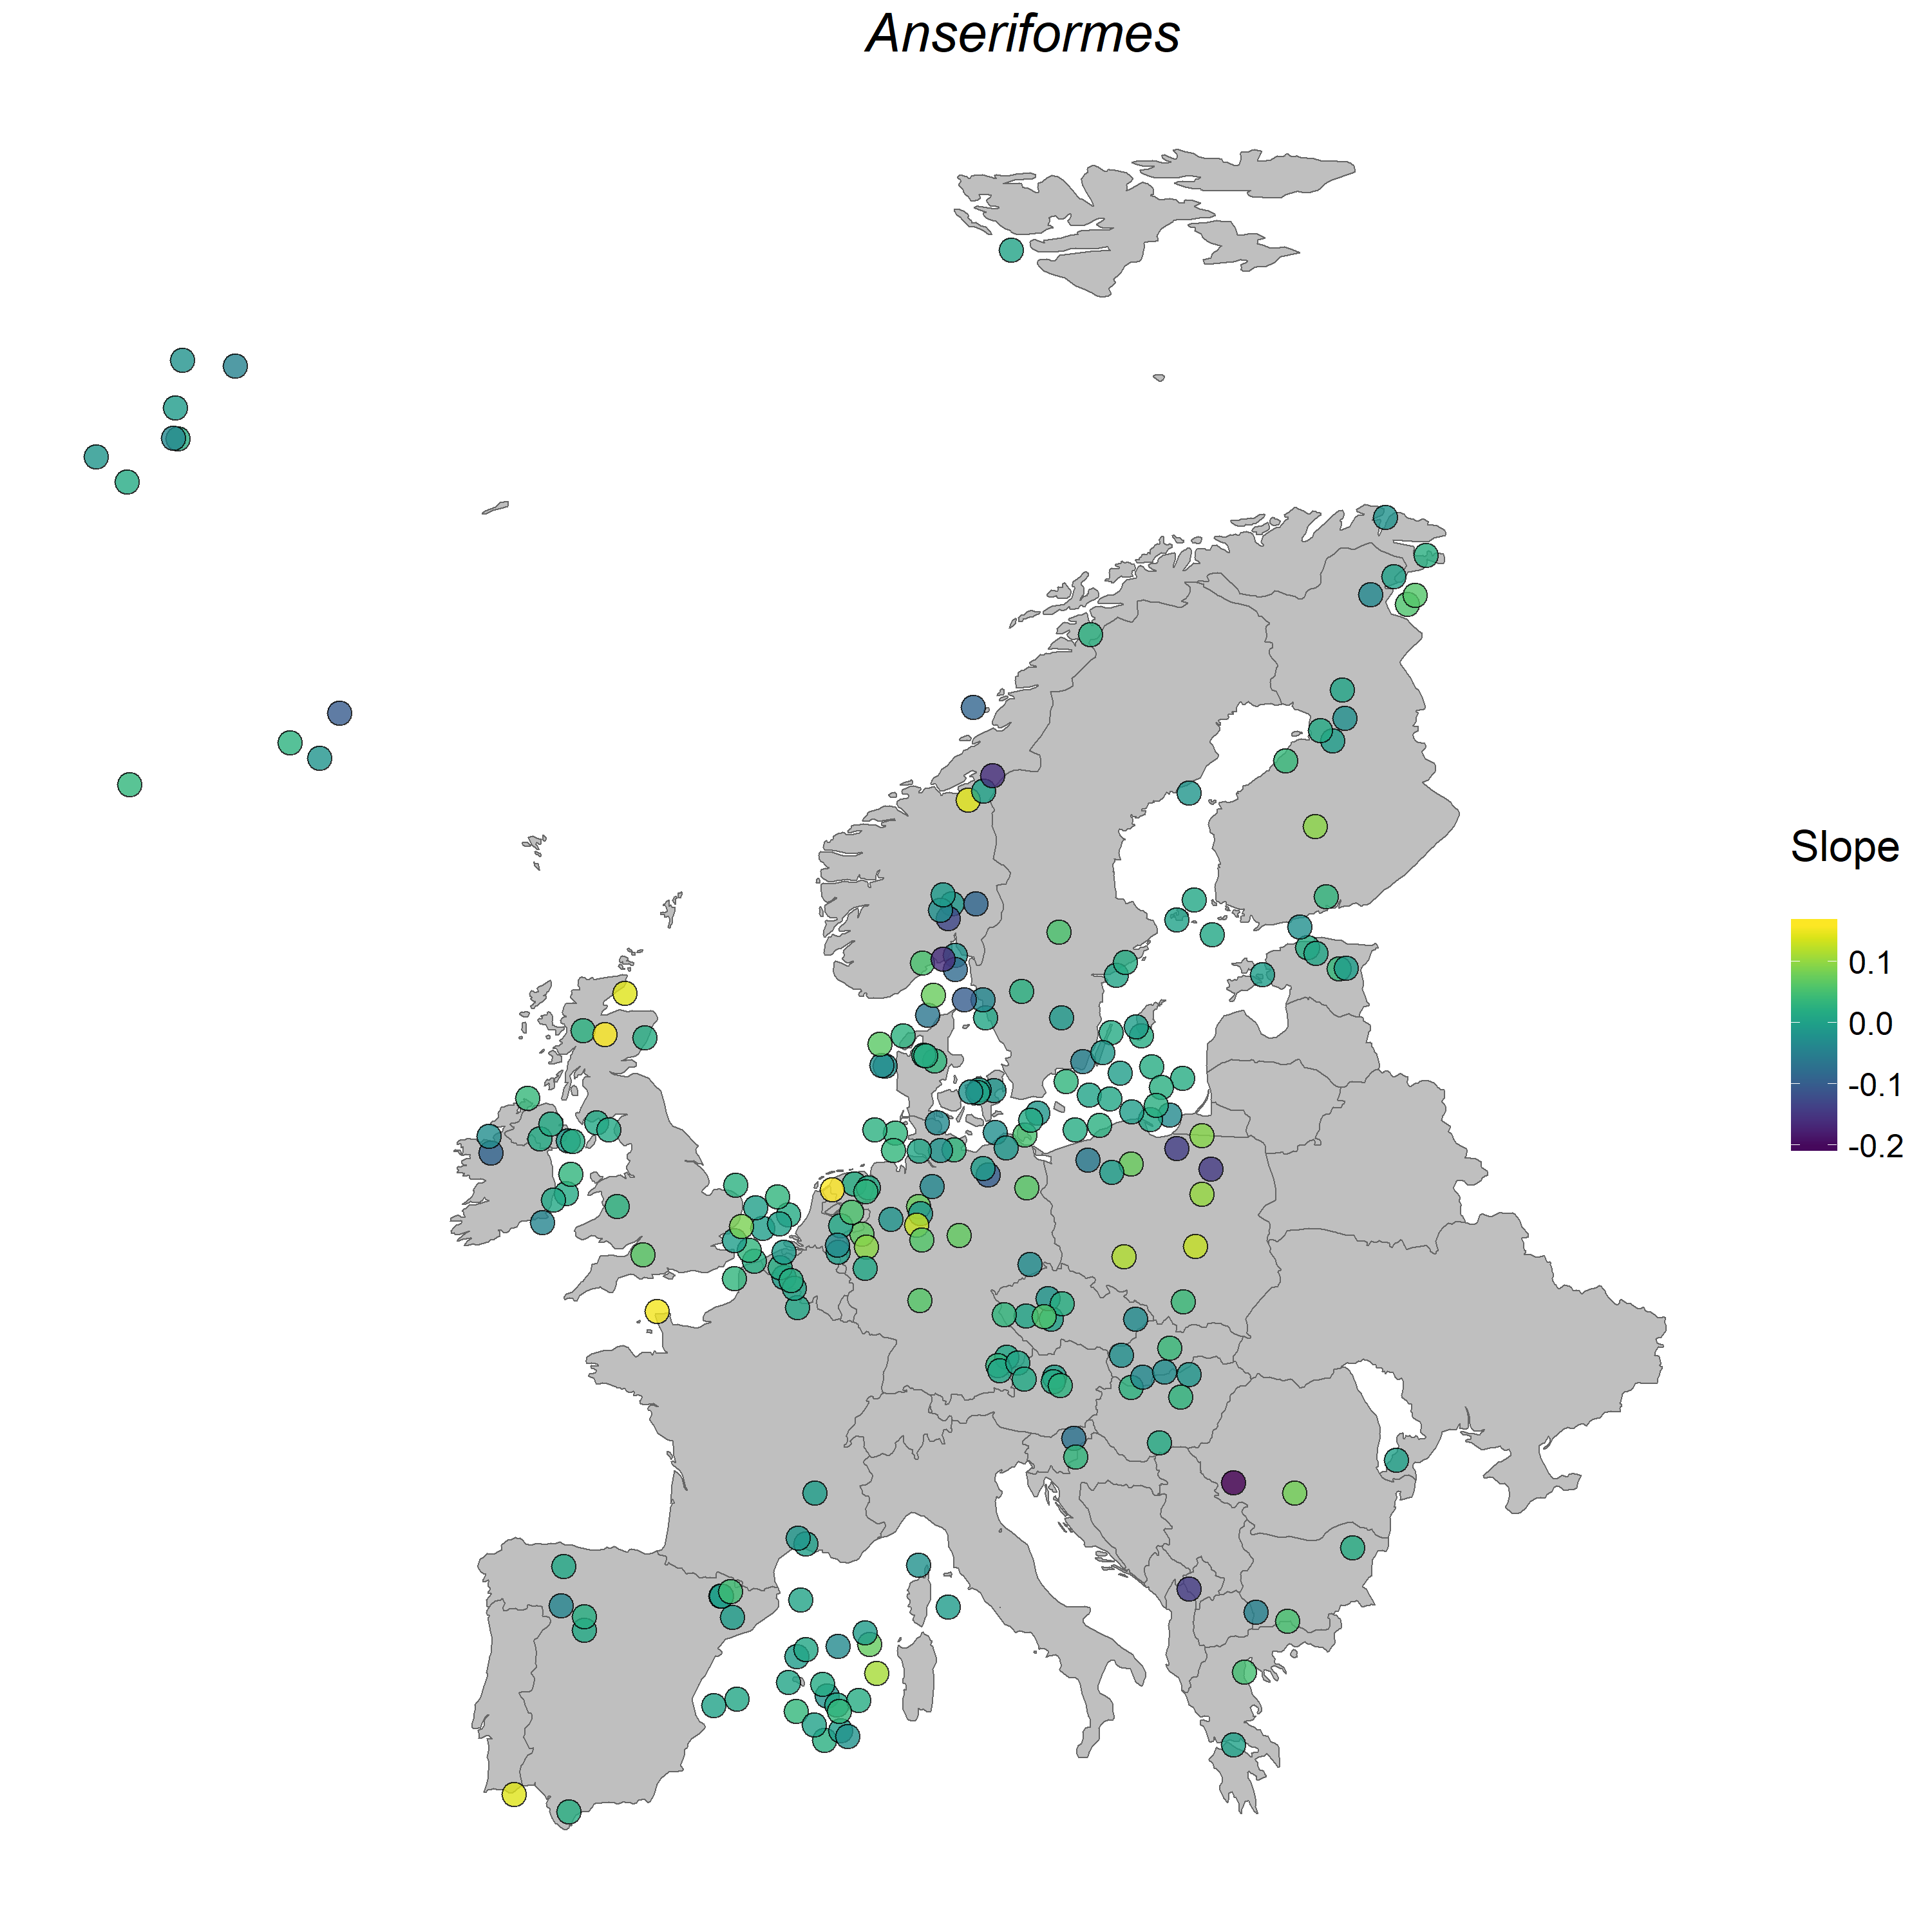 Figure 1. _Anseriformes_ populations in Europe.